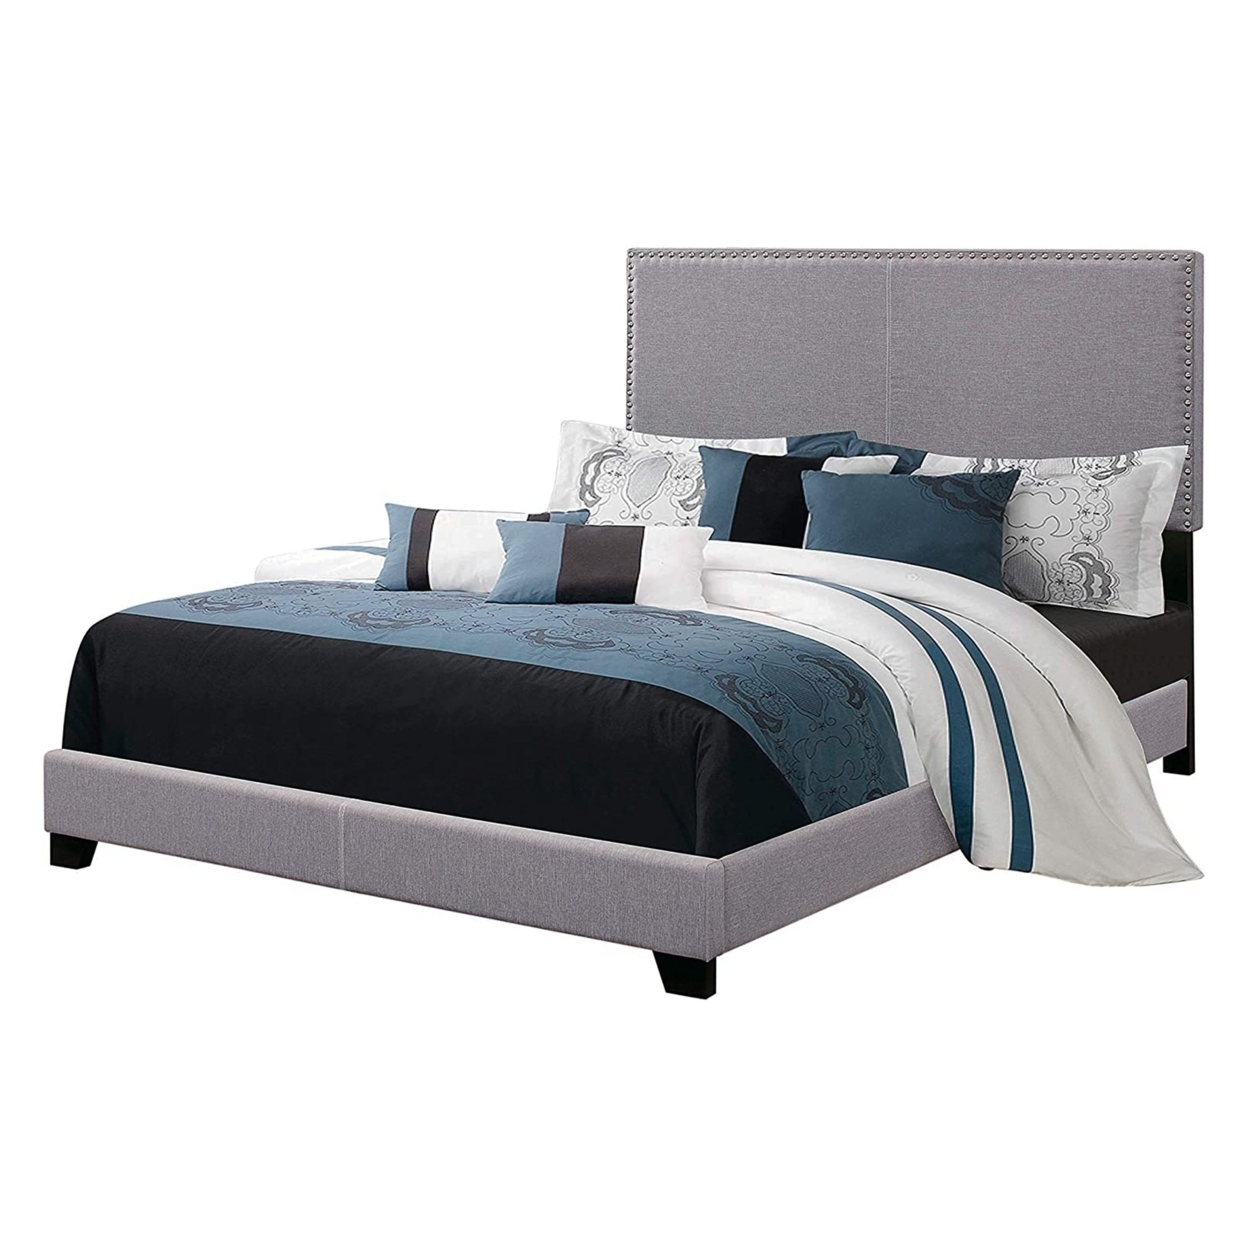 Fabric Upholstered Queen Size Platform Bed With Nail Head Trim, Gray- Saltoro Sherpi